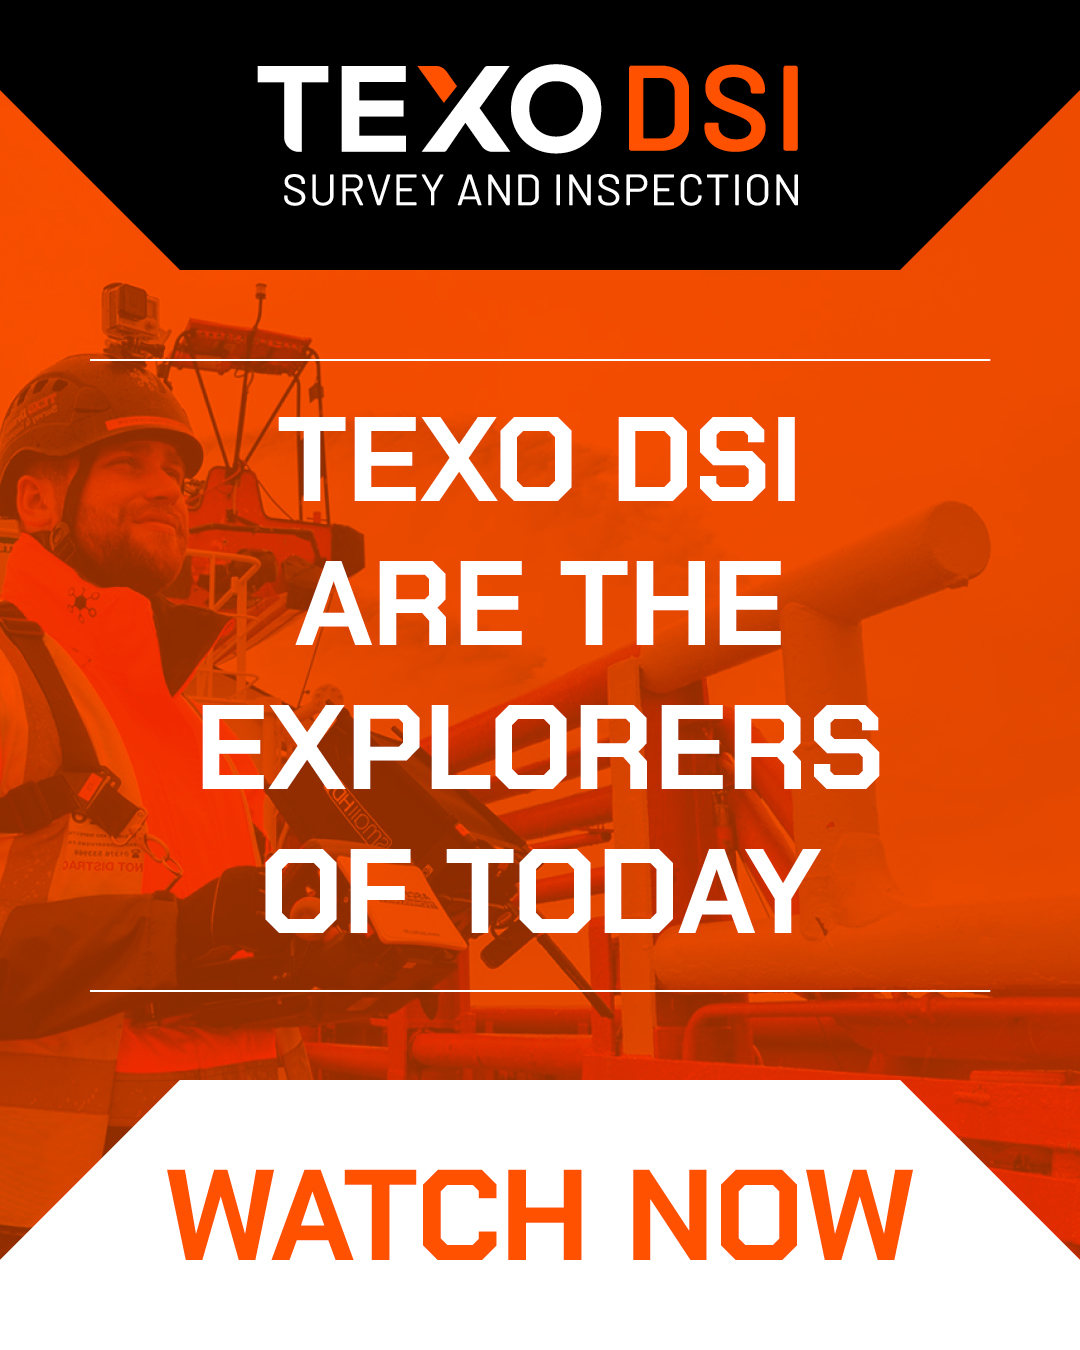 See Why TEXO DSI Are The Explorers Of Today